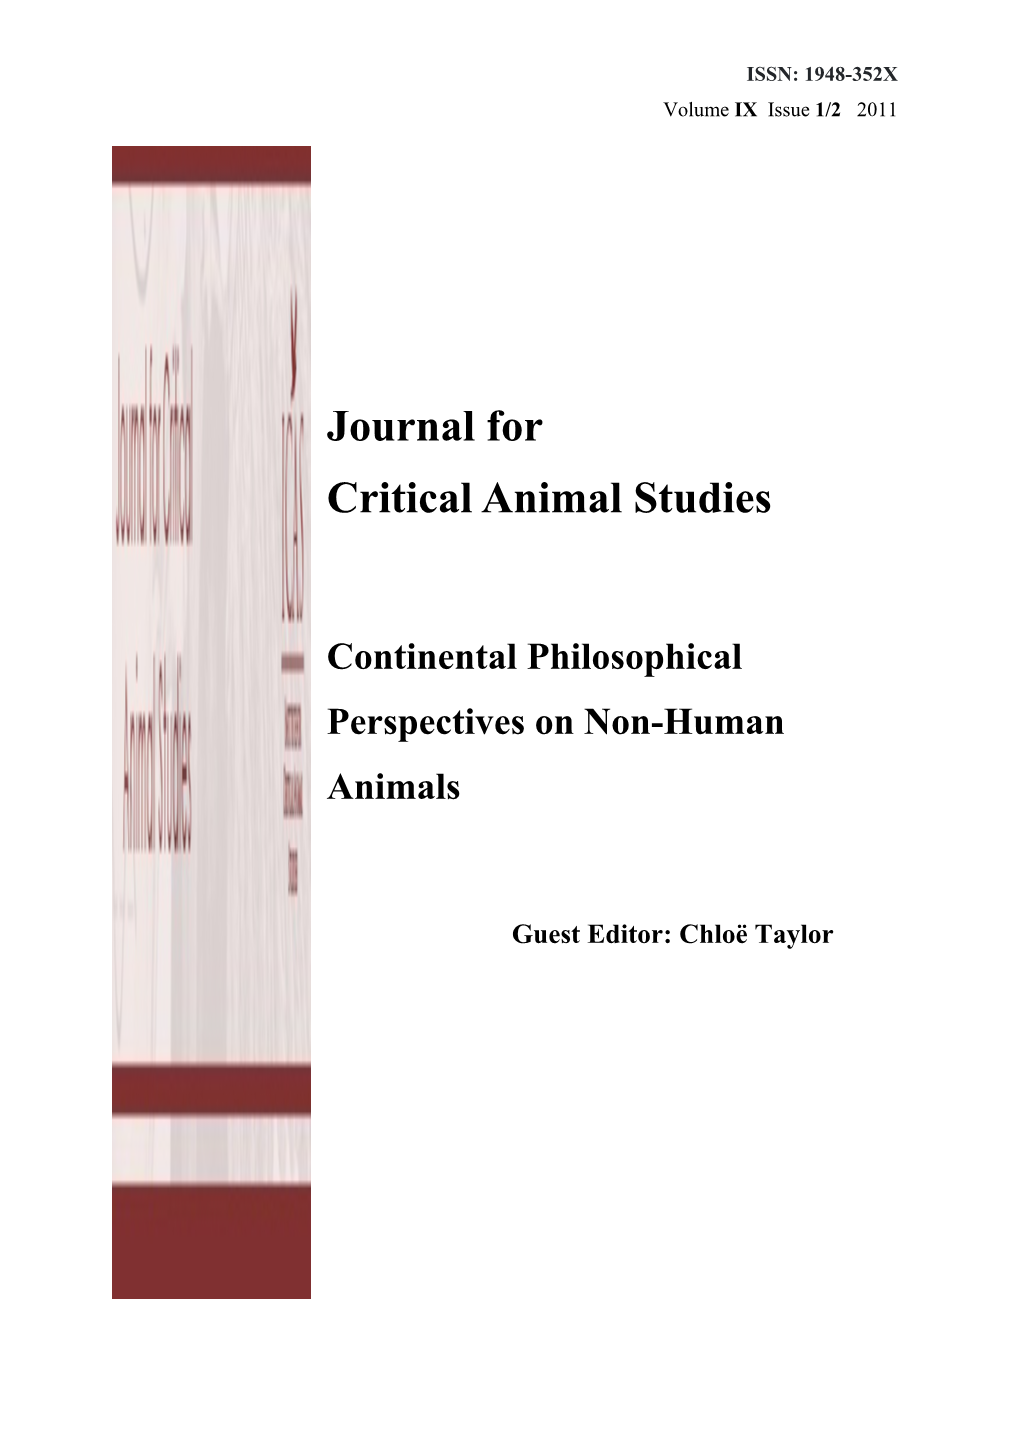 Continental Philosophical Perspectives on Non-Human Animals